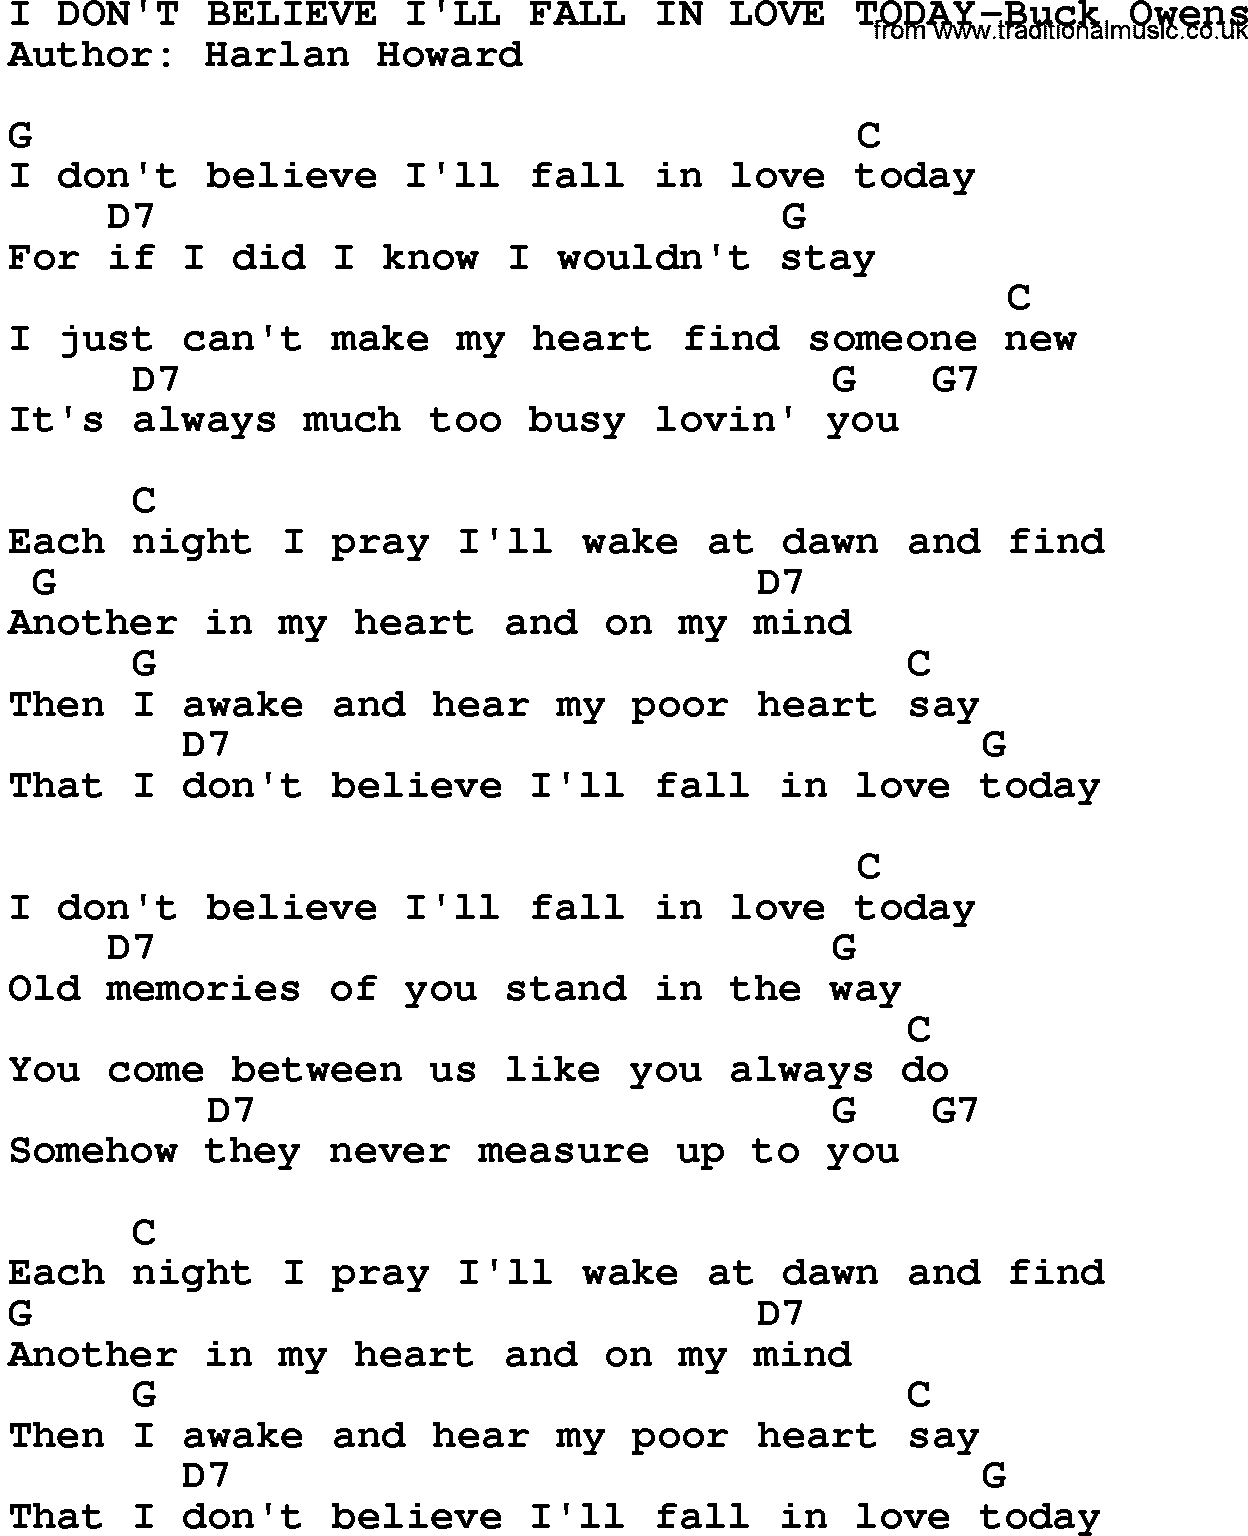 Country music song: I Don't Believe I'll Fall In Love Today-Buck Owens lyrics and chords